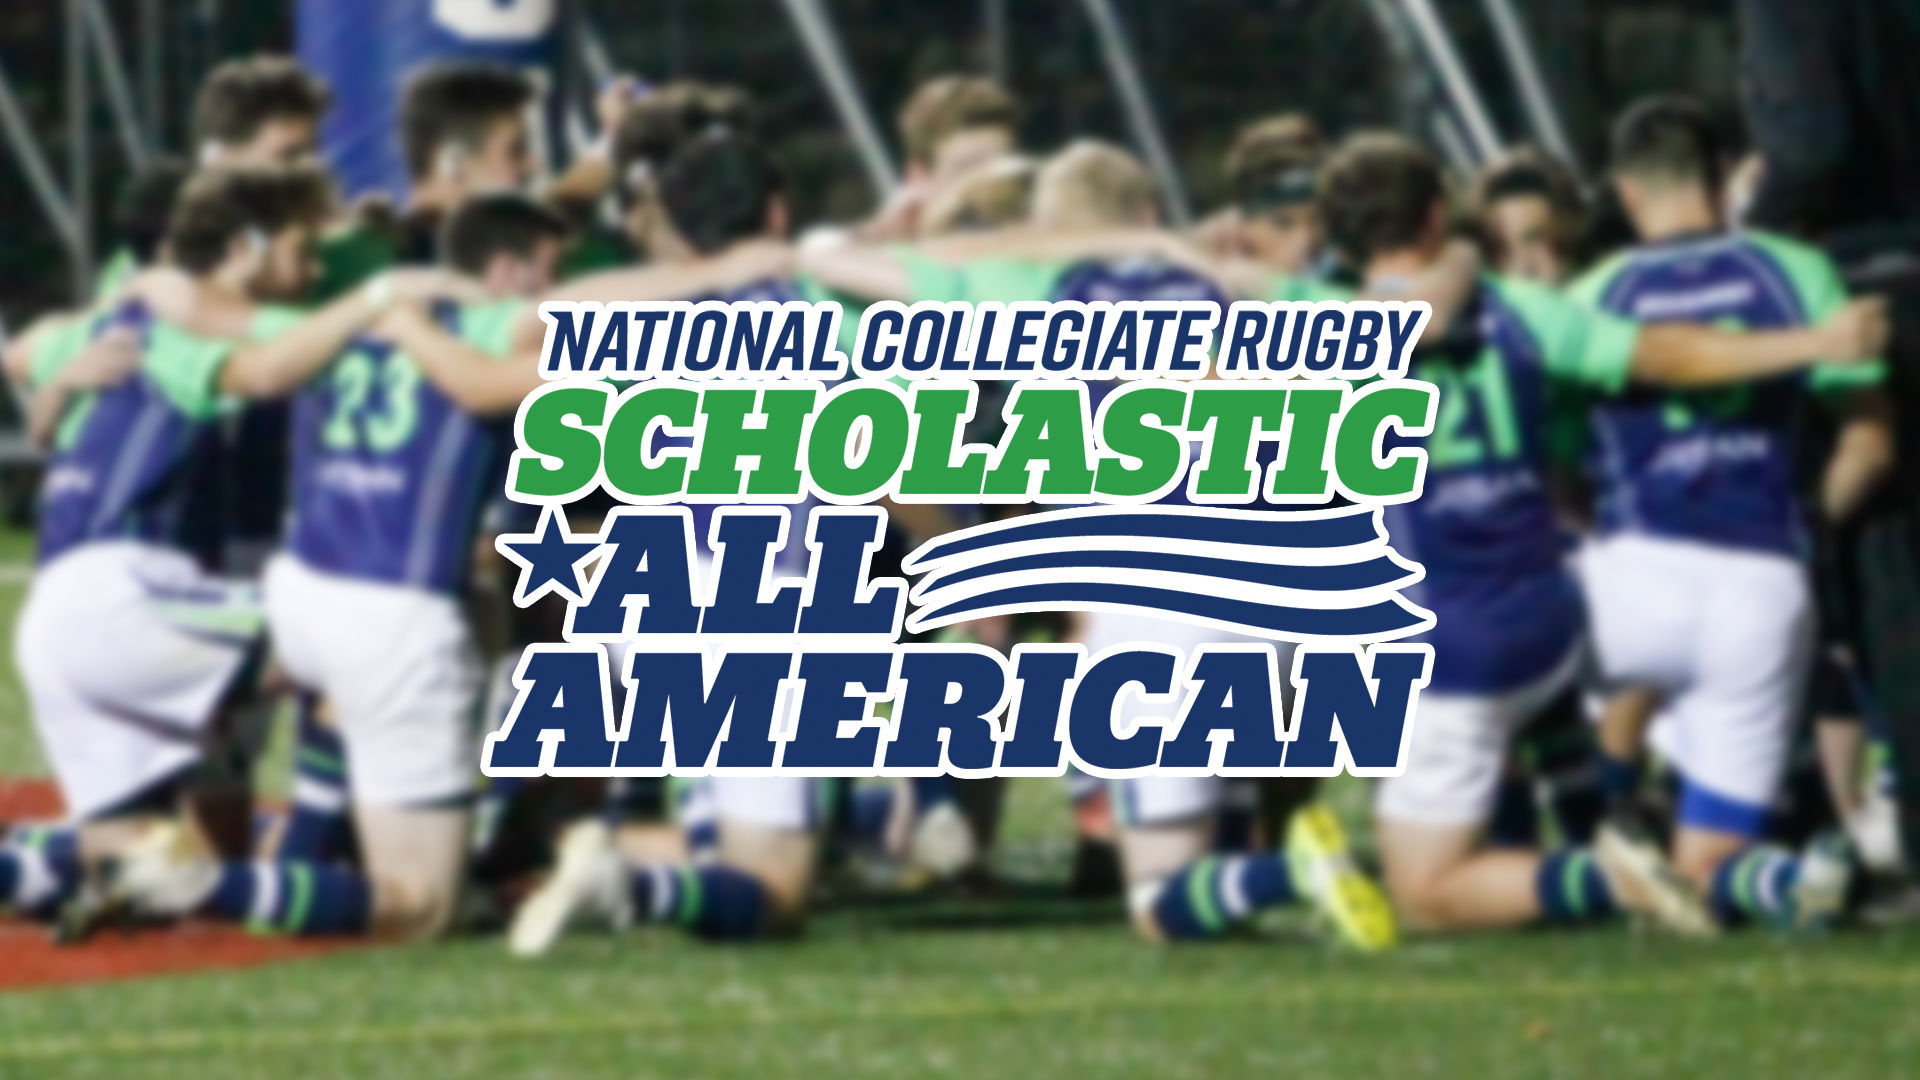 Seven Seahawks named Scholastic All-American by NCR.